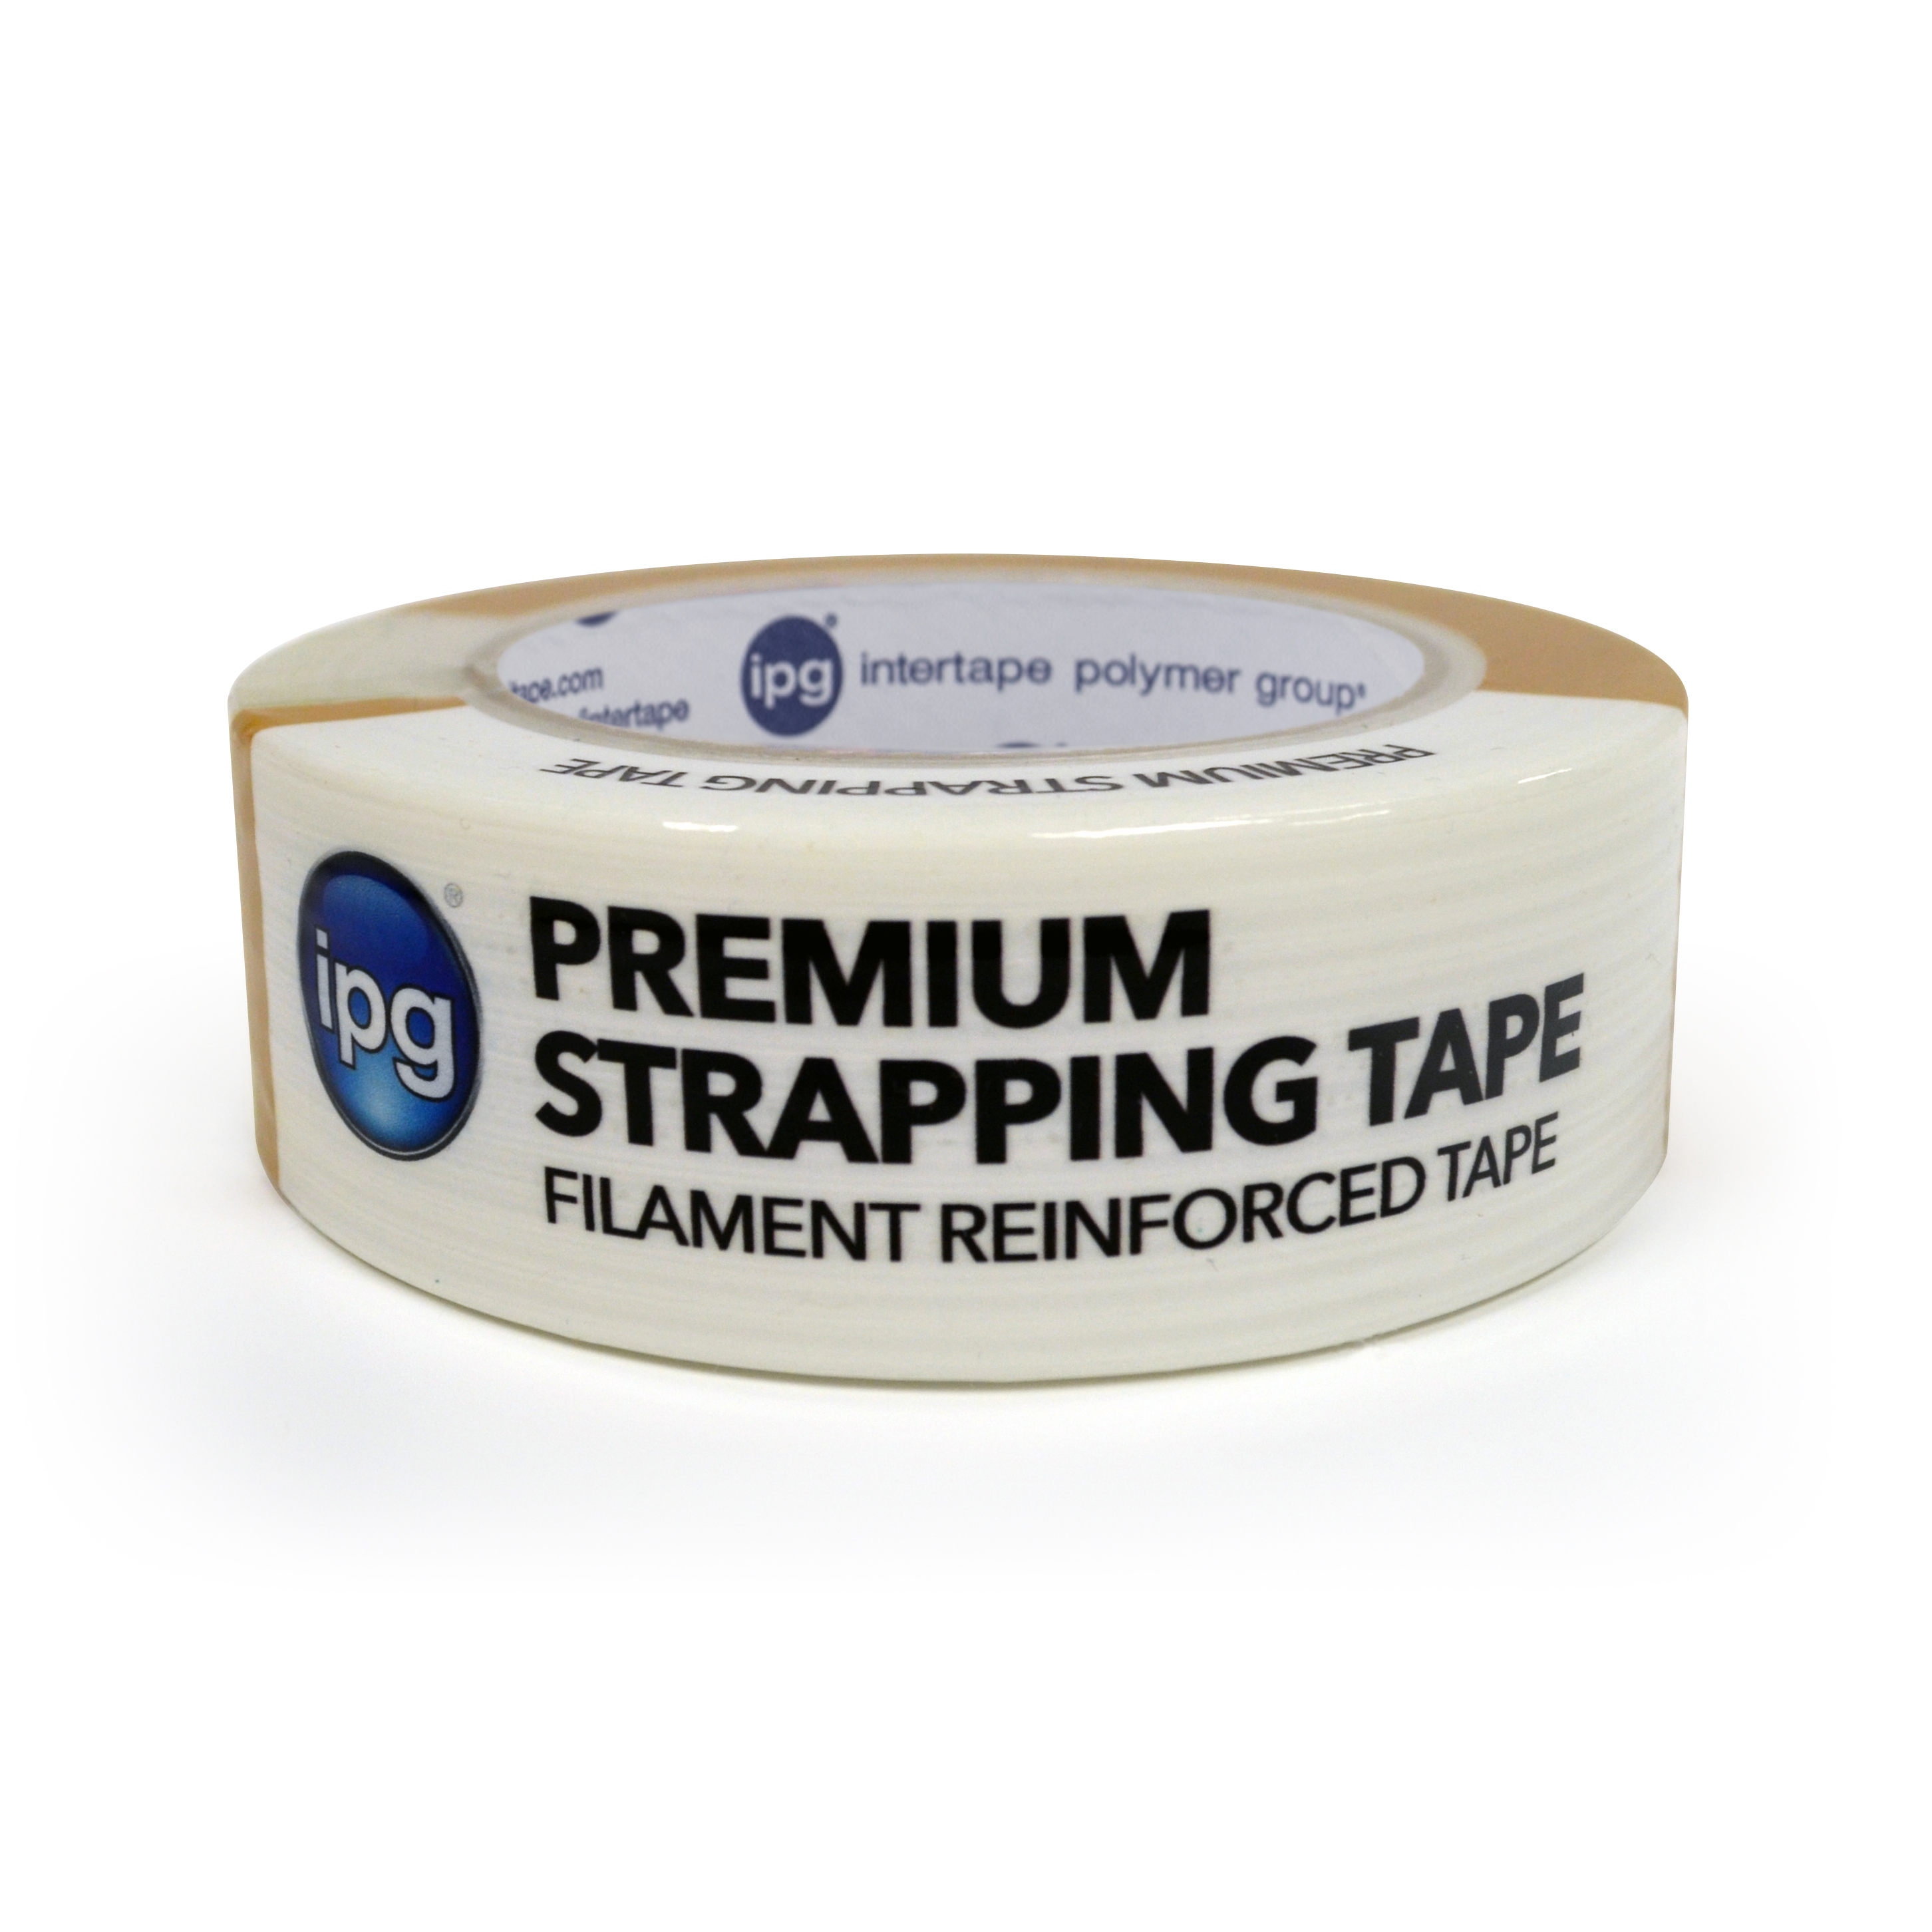 Premium Strapping Tape - IPG